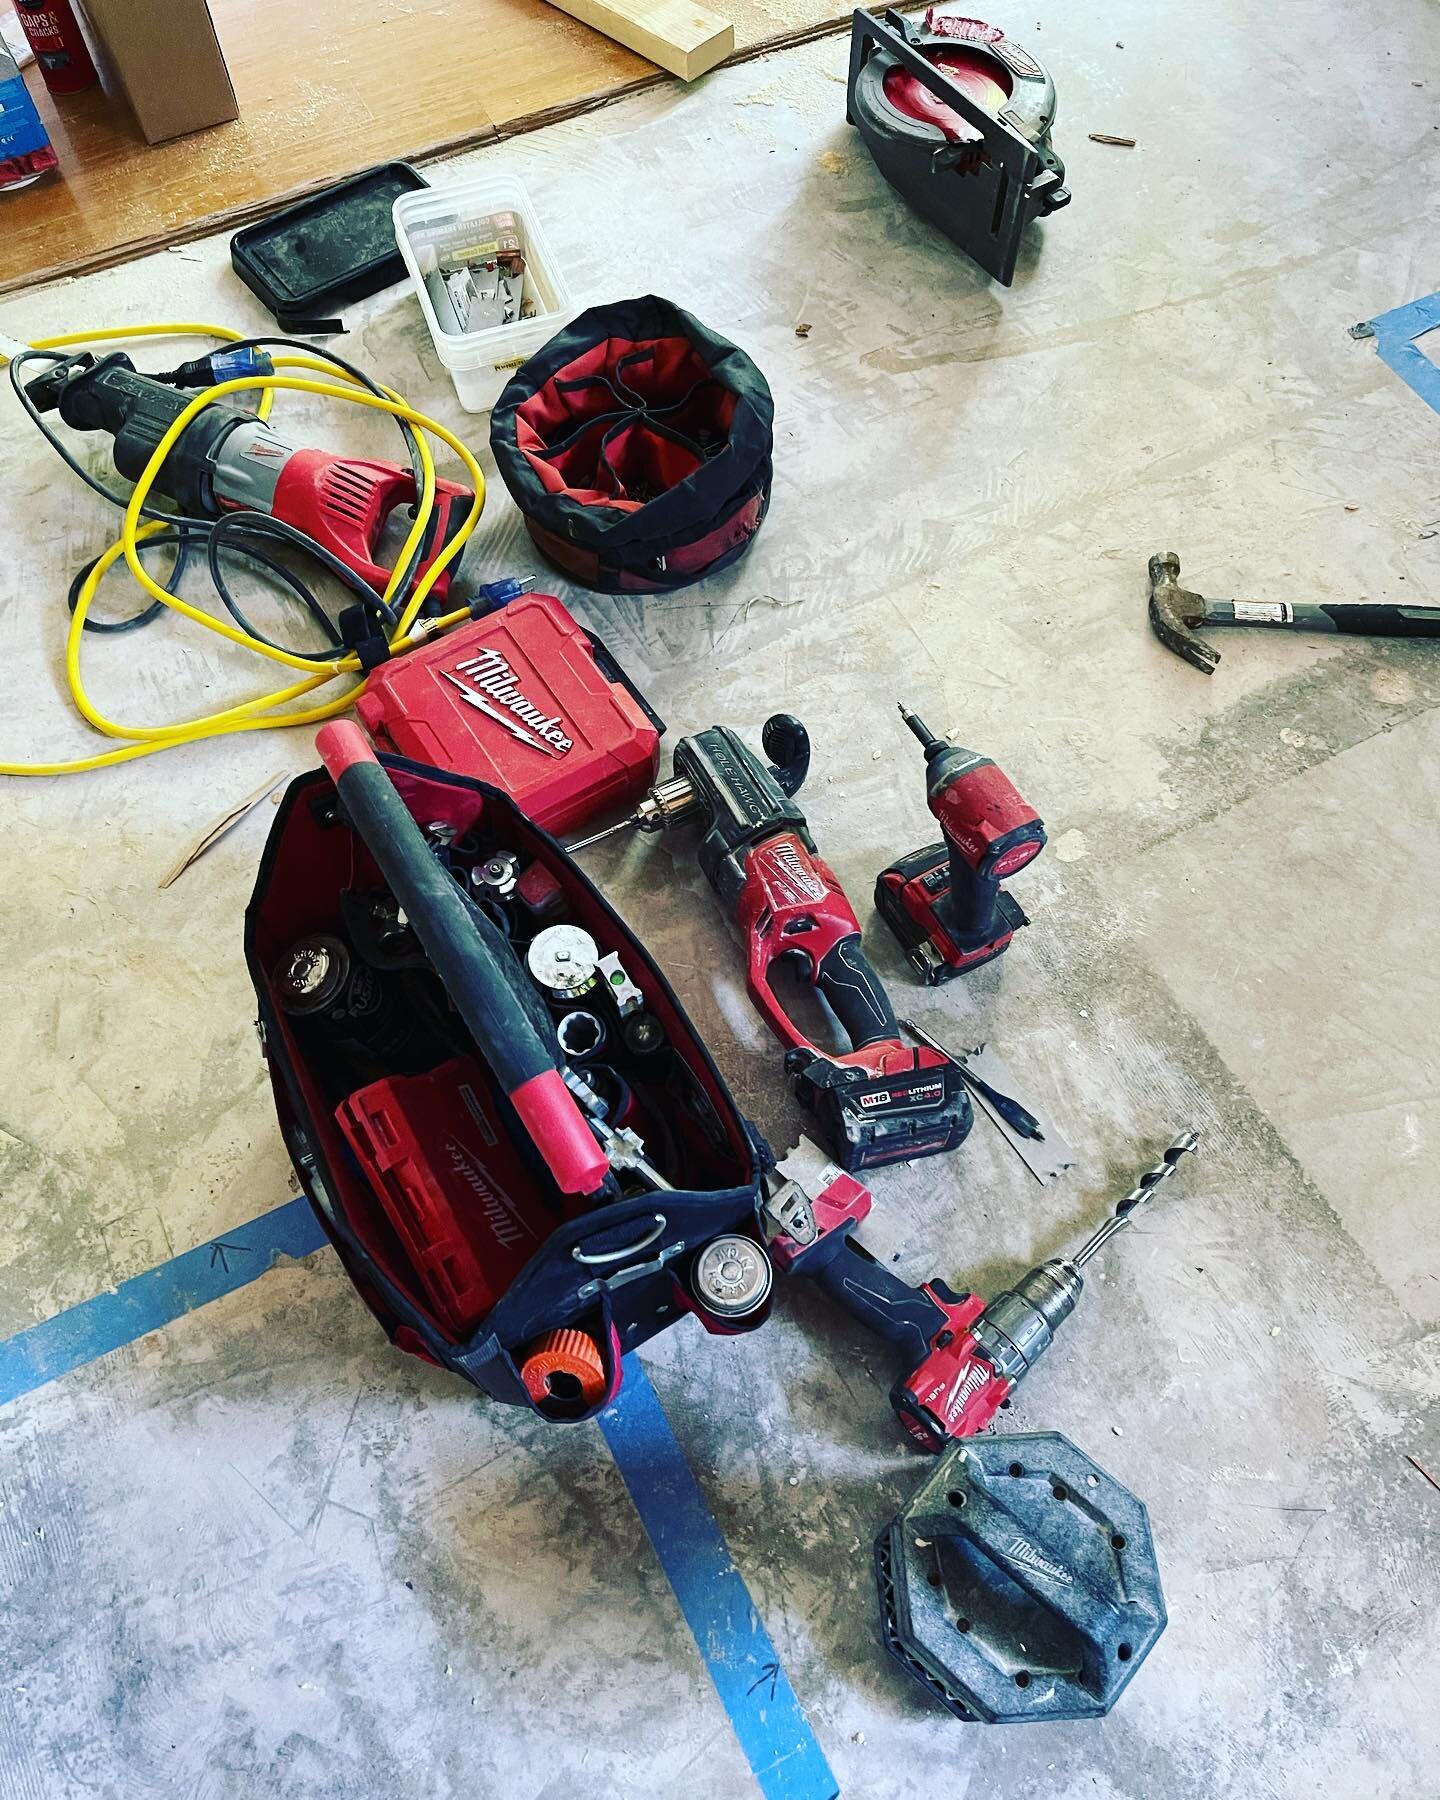 @milwaukeetool always shows a bunch of fancy new pack-outs and somebody&rsquo;s collection of brand spanking new tools. How bout some OG warn af jobsite tools. Dropped, thrown, damaged, and still make n me money!! 😎🗽🛠#milwaukeetools #kitchenremode